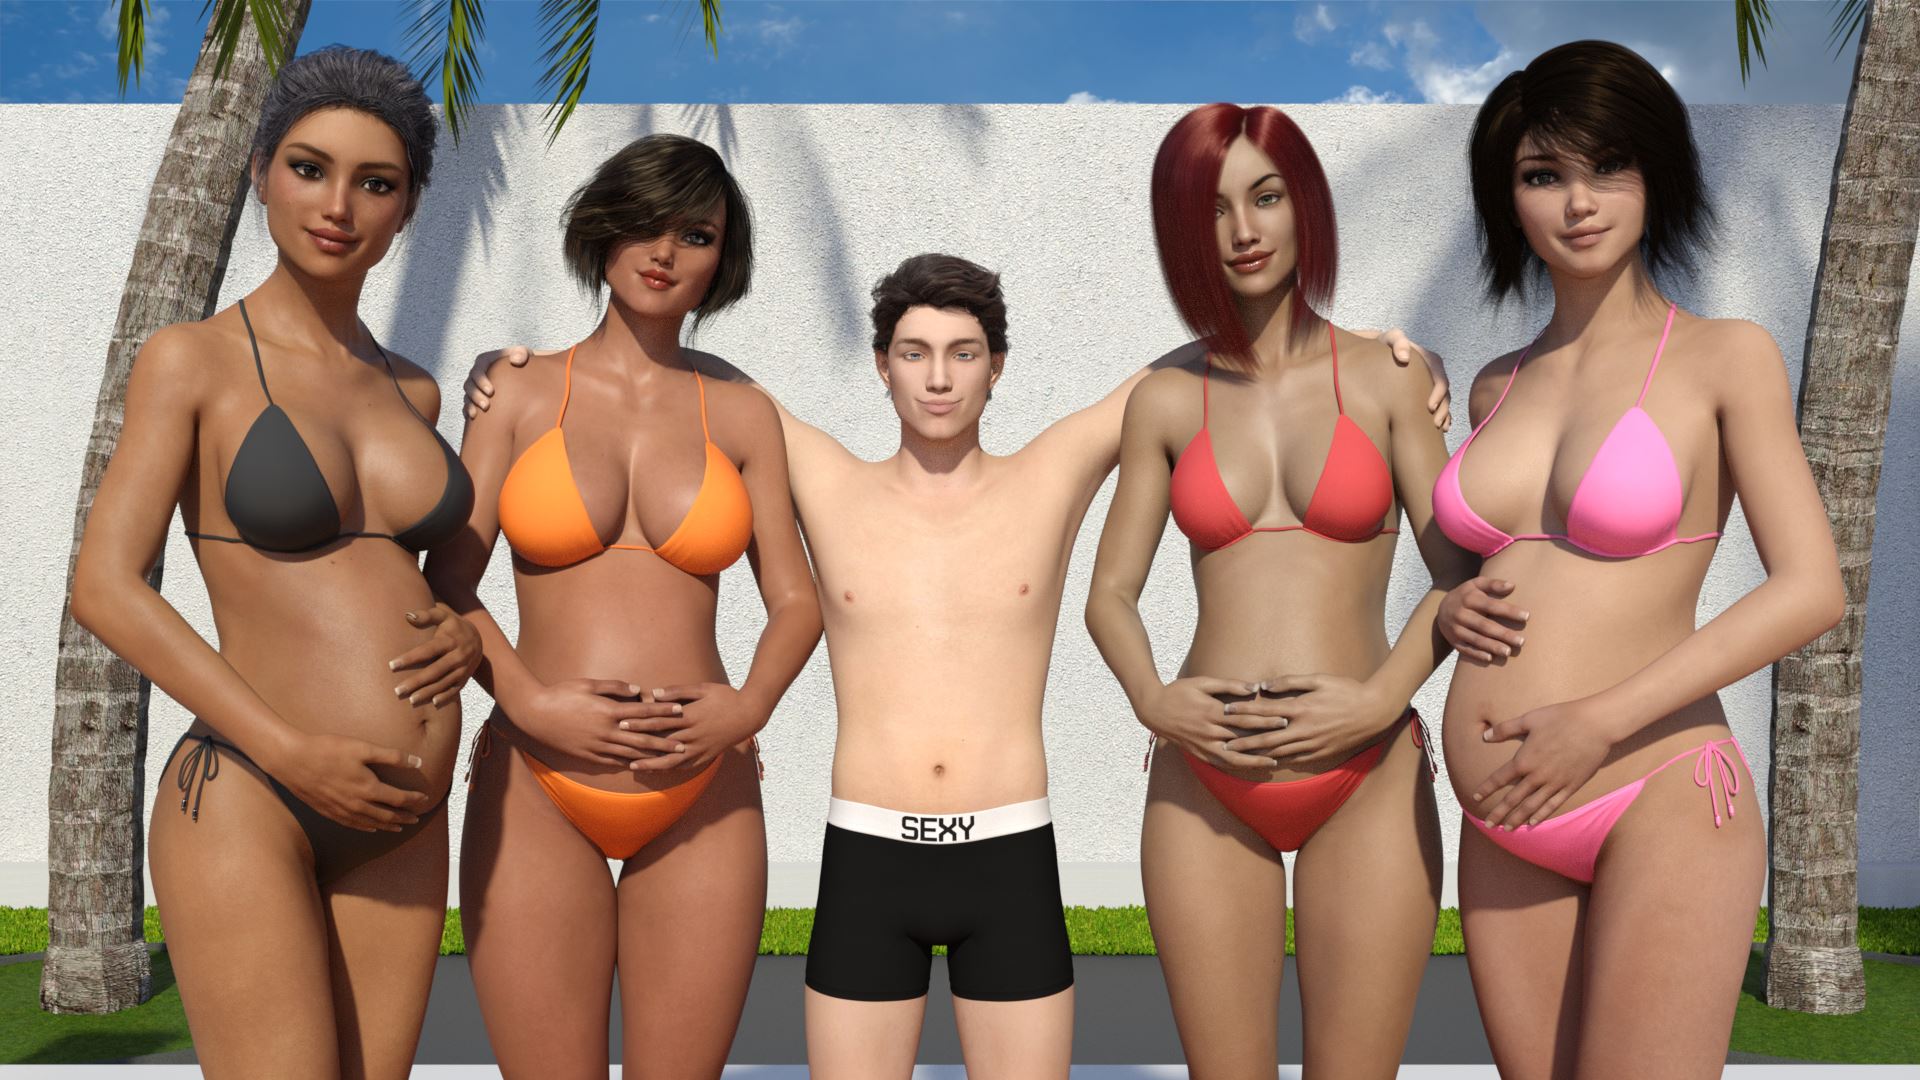 Big Brother - Big Brother Expanding The Family Ren'Py Porn Sex Game v.0.1 Download for  Windows, MacOS, Linux